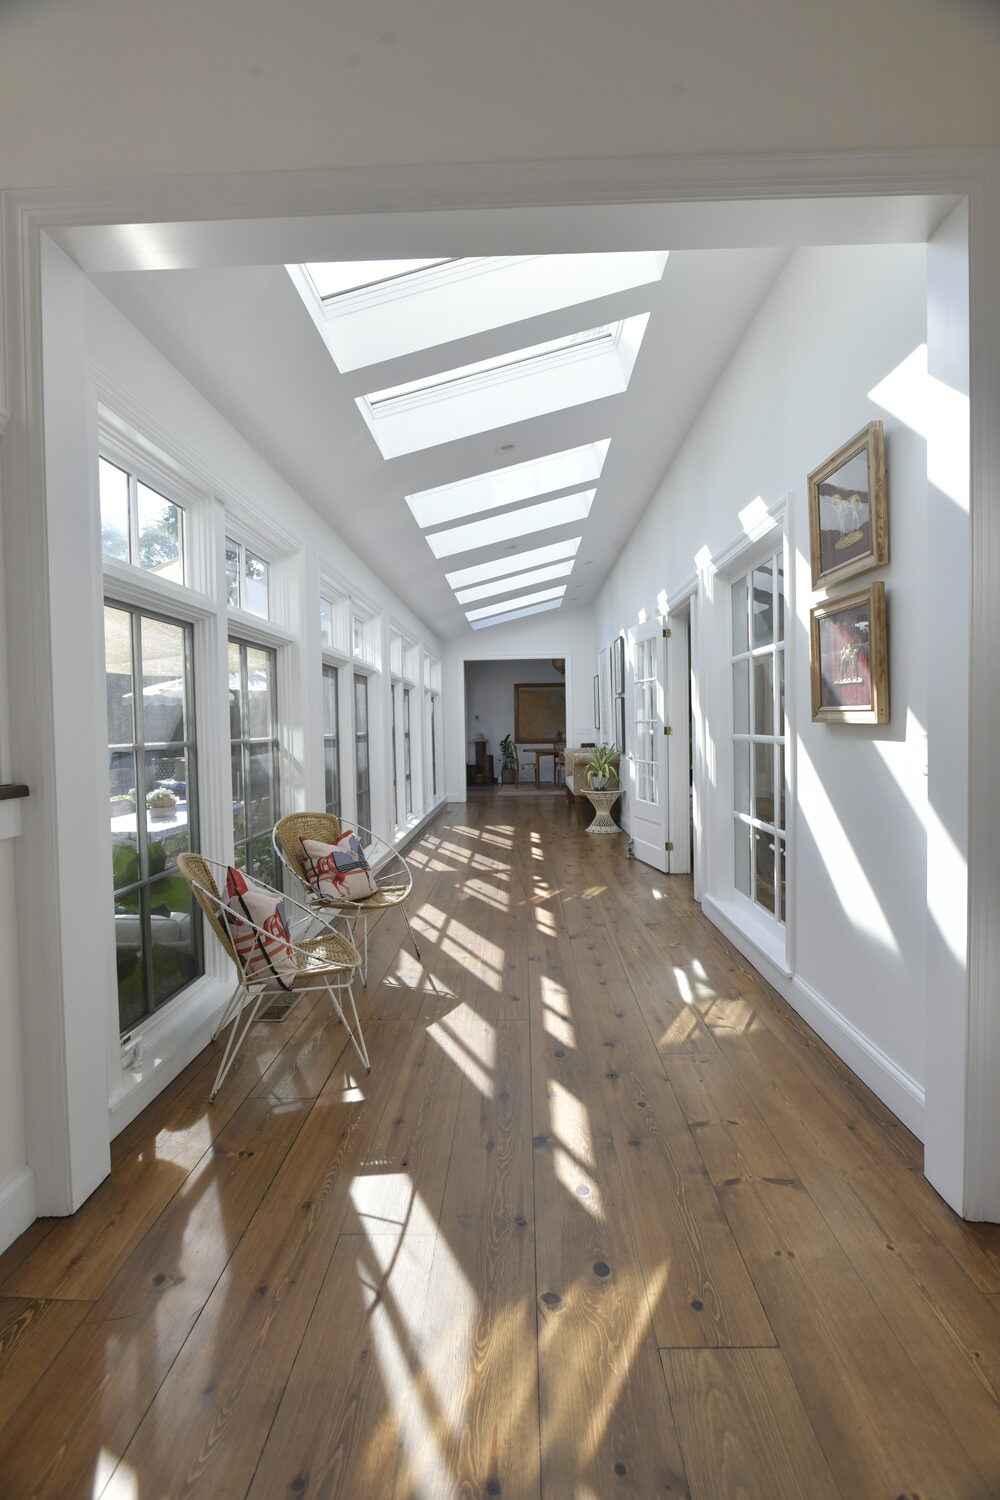 The light-filled gallery stretches from the front entry to the kitchen and great room beyond.   DANA SHAW